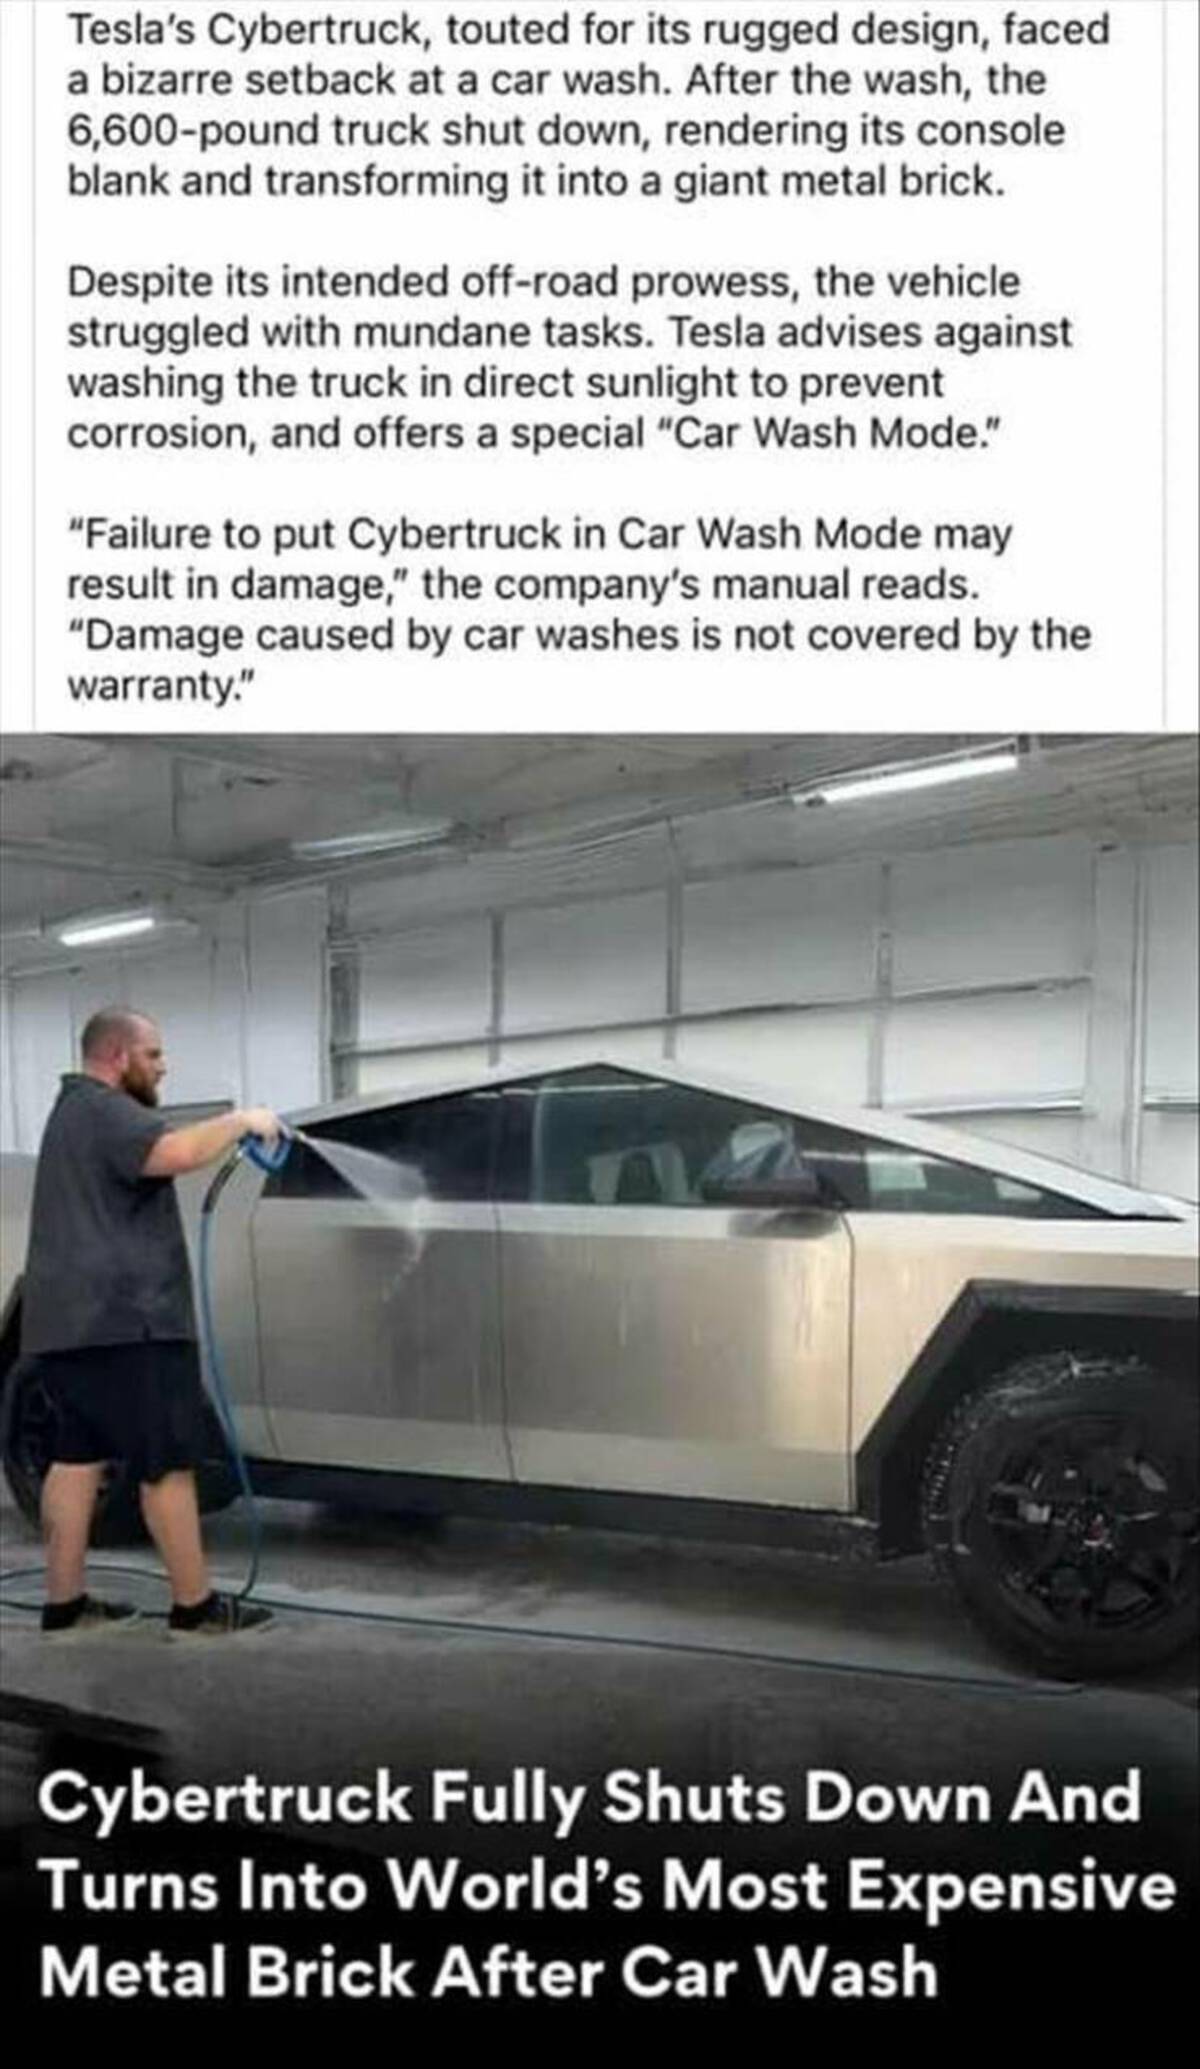 executive car - Tesla's Cybertruck, touted for its rugged design, faced a bizarre setback at a car wash. After the wash, the 6,600pound truck shut down, rendering its console blank and transforming it into a giant metal brick. Despite its intended offroad